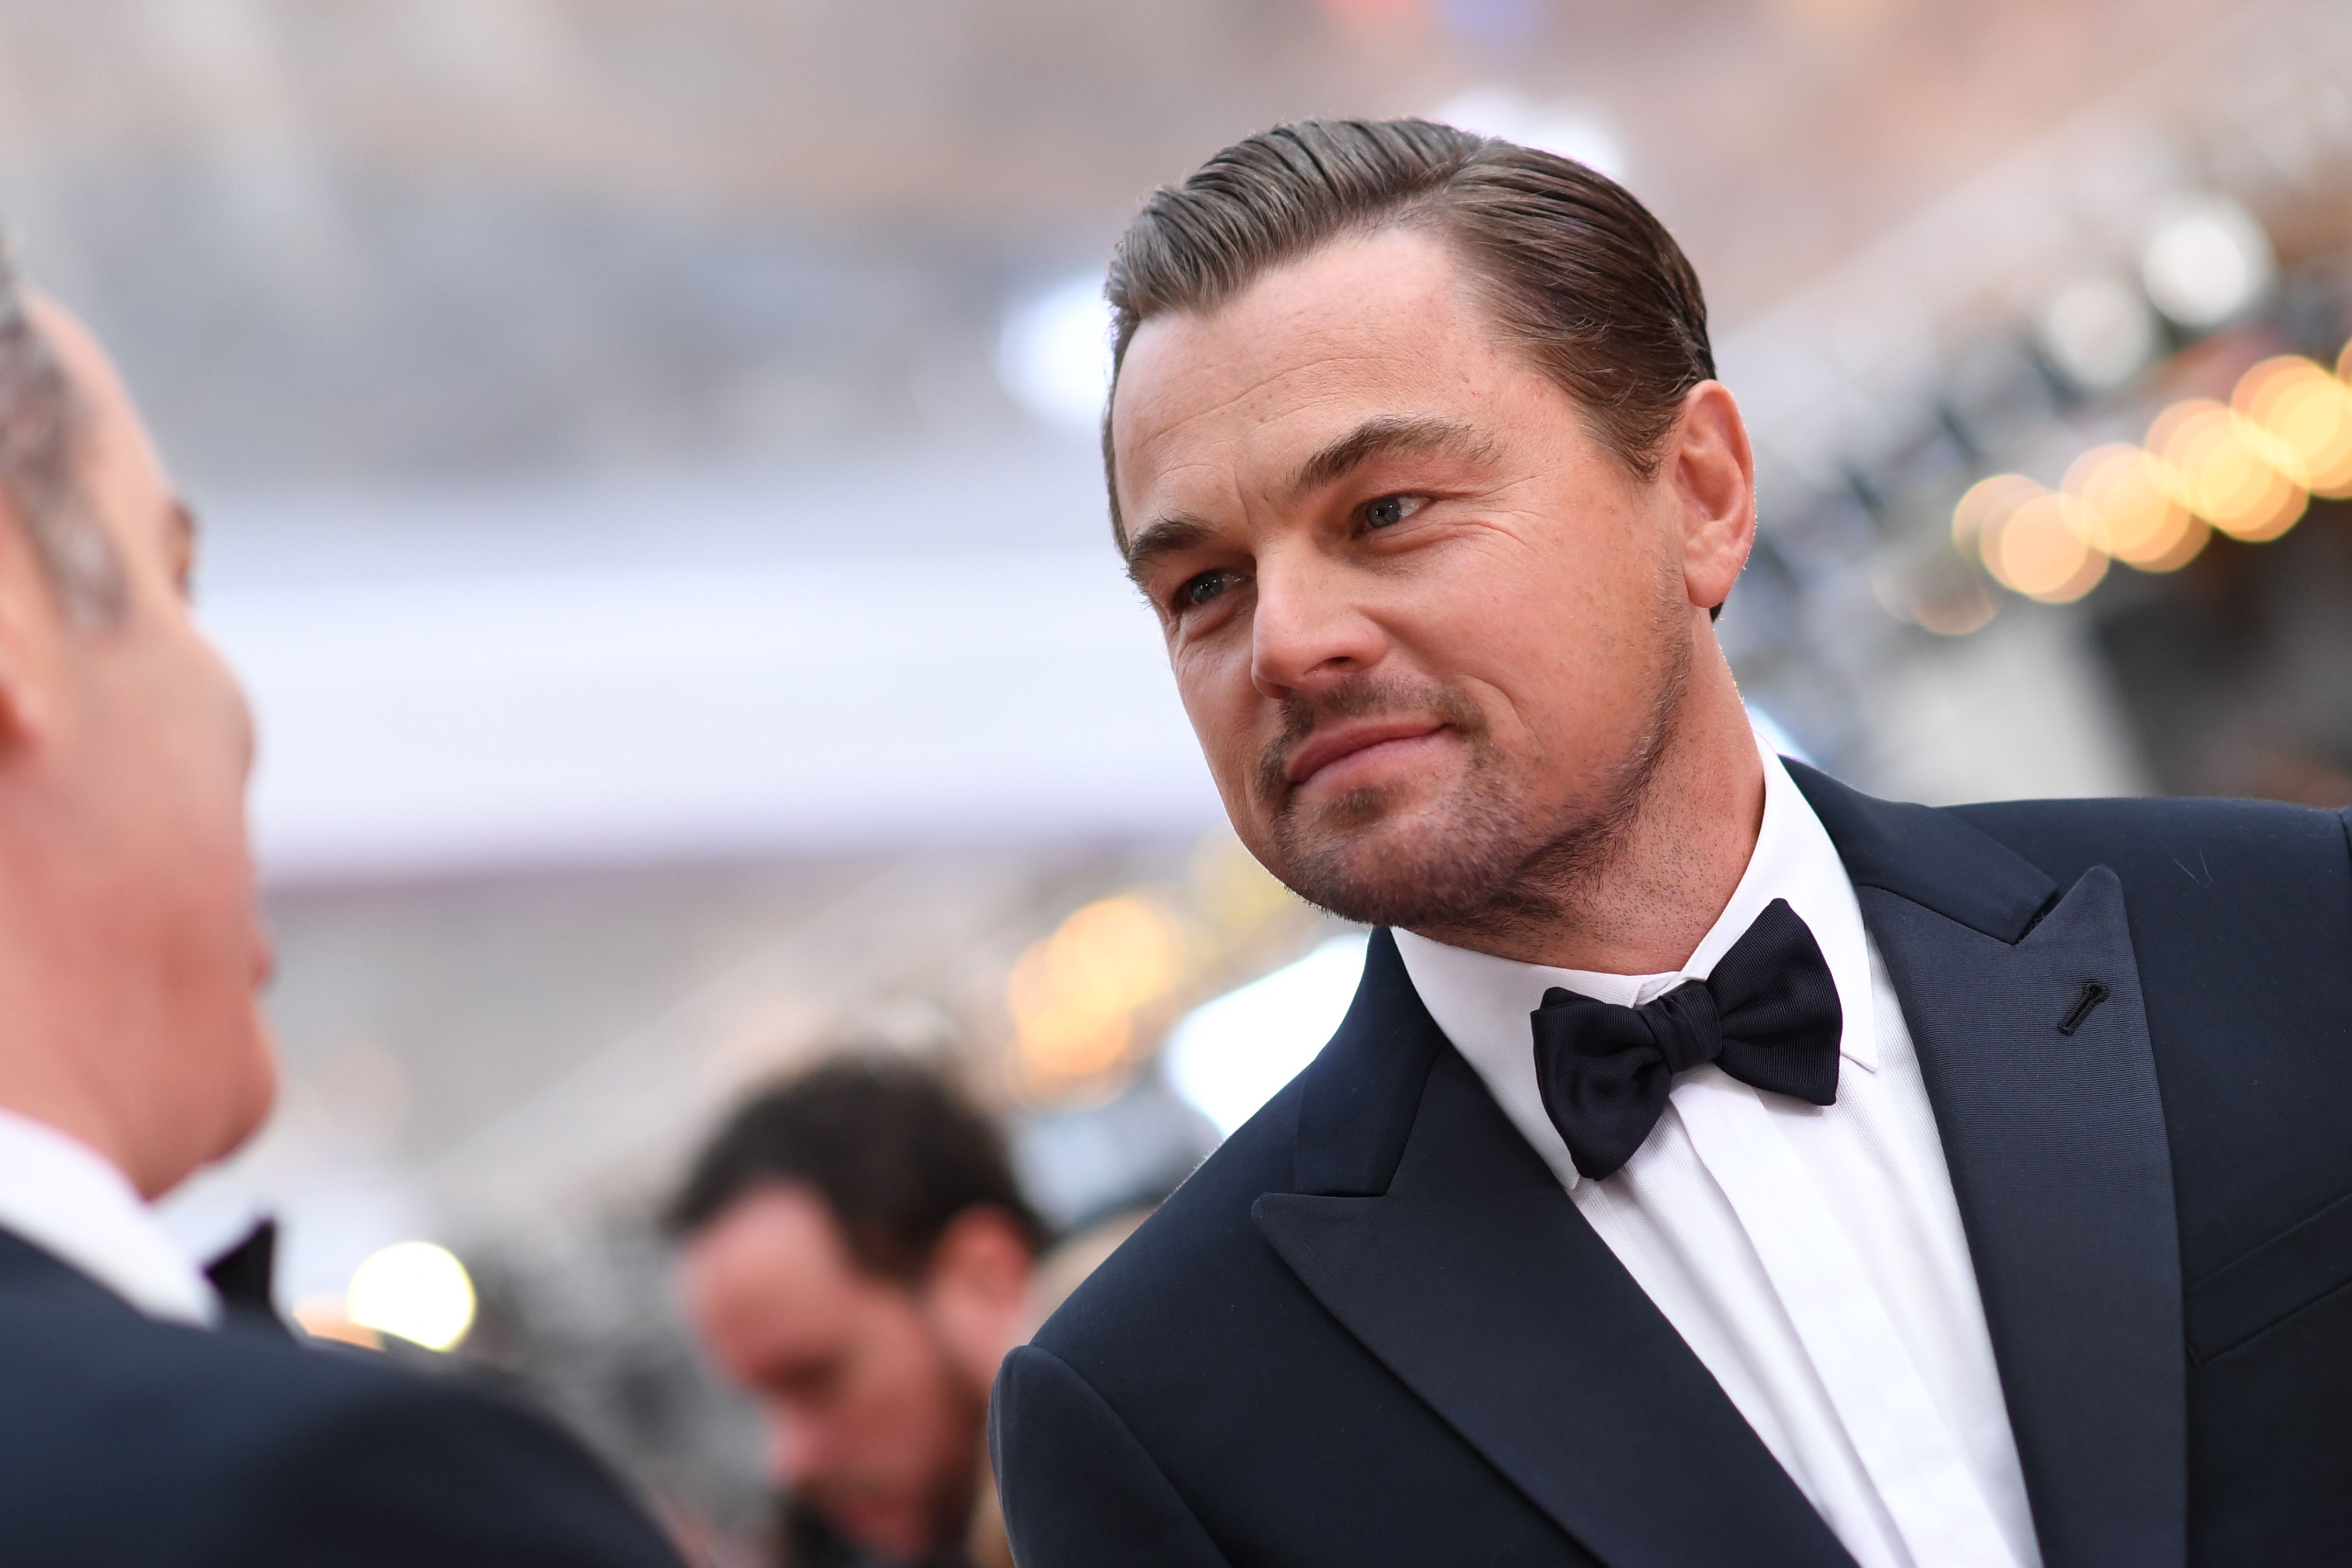 Leonardo DiCaprio arrives for the 92nd Oscars at the Dolby Theatre